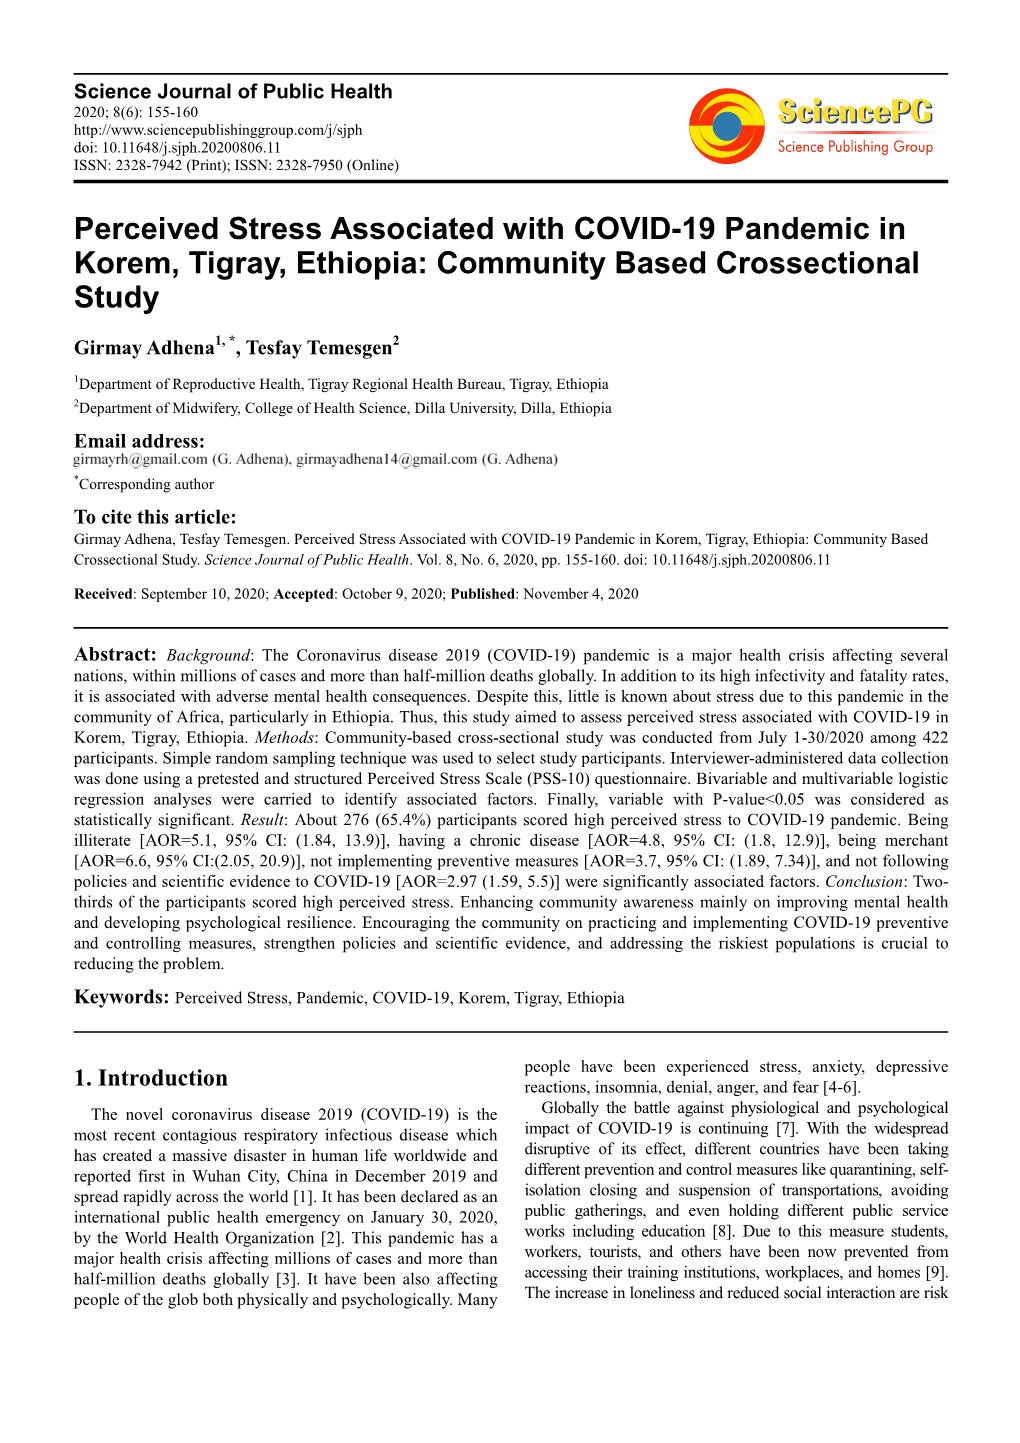 Perceived Stress Associated with COVID-19 Pandemic in Korem, Tigray, Ethiopia: Community Based Crossectional Study